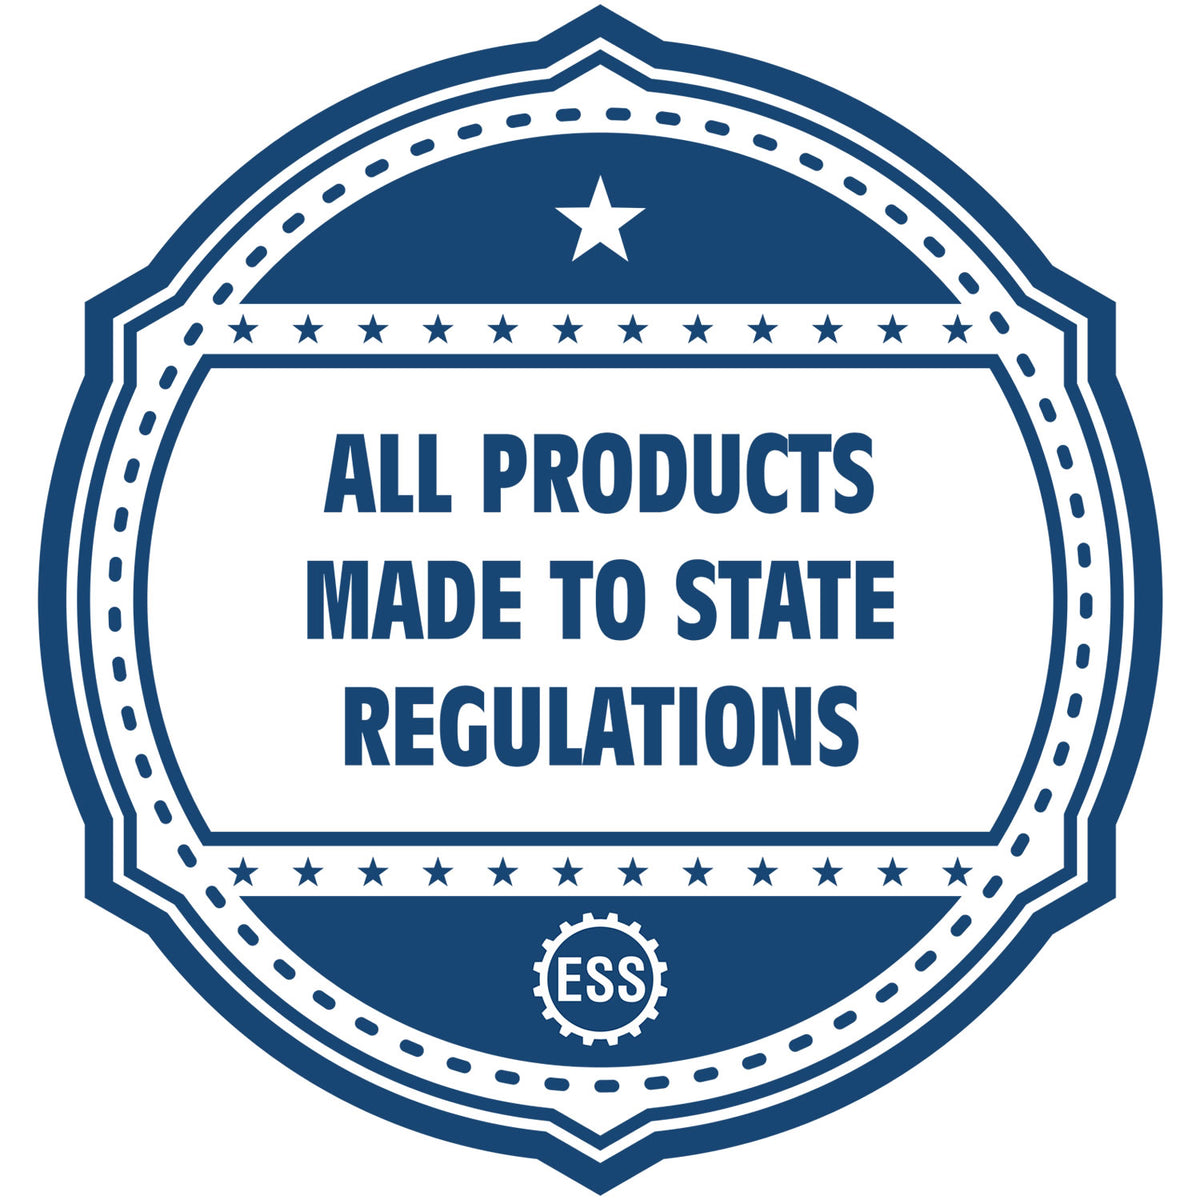 An icon or badge element for the Long Reach Maryland PE Seal showing that this product is made in compliance with state regulations.